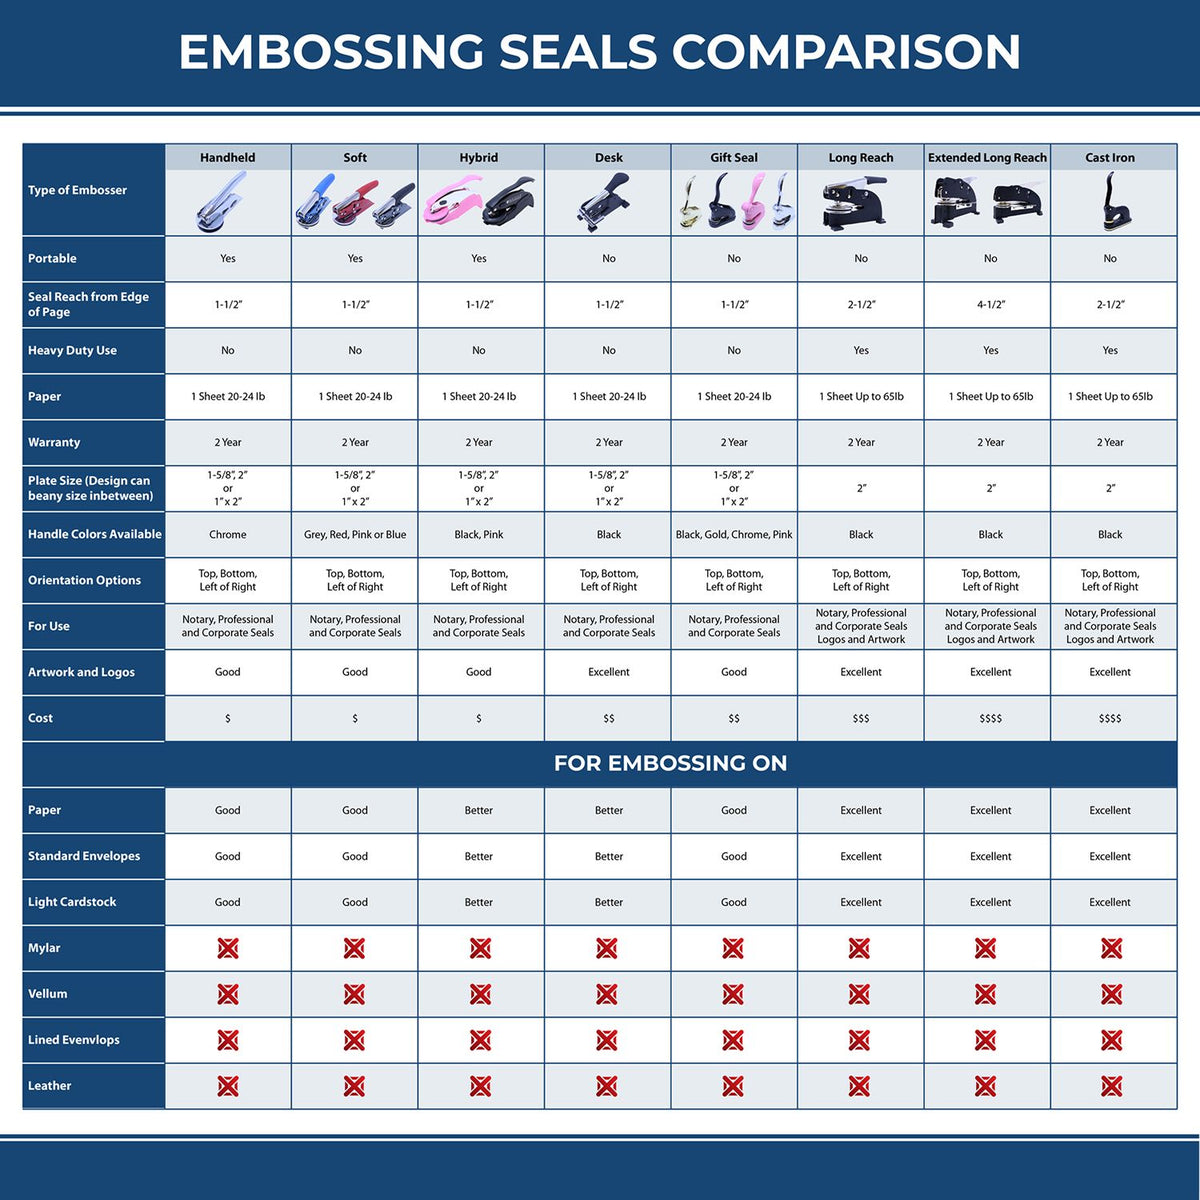 A comparison chart for the different types of mount models available for the Handheld West Virginia Professional Engineer Embosser.